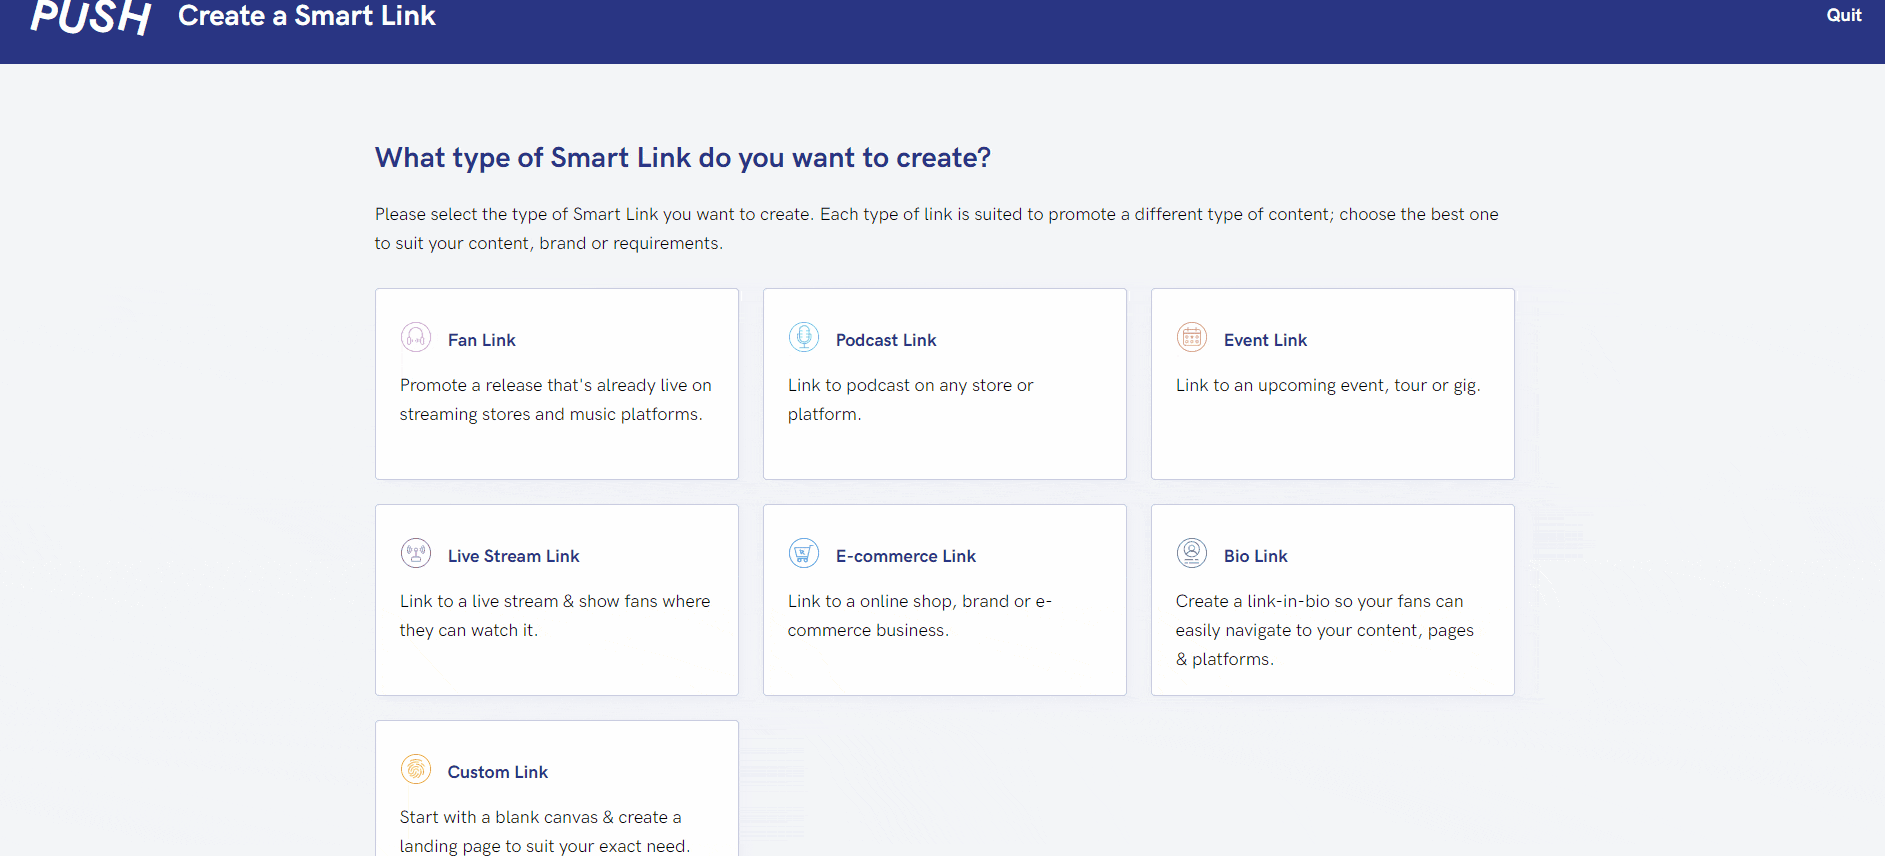 GIF showing the Smart Link template options and selecting Event Link